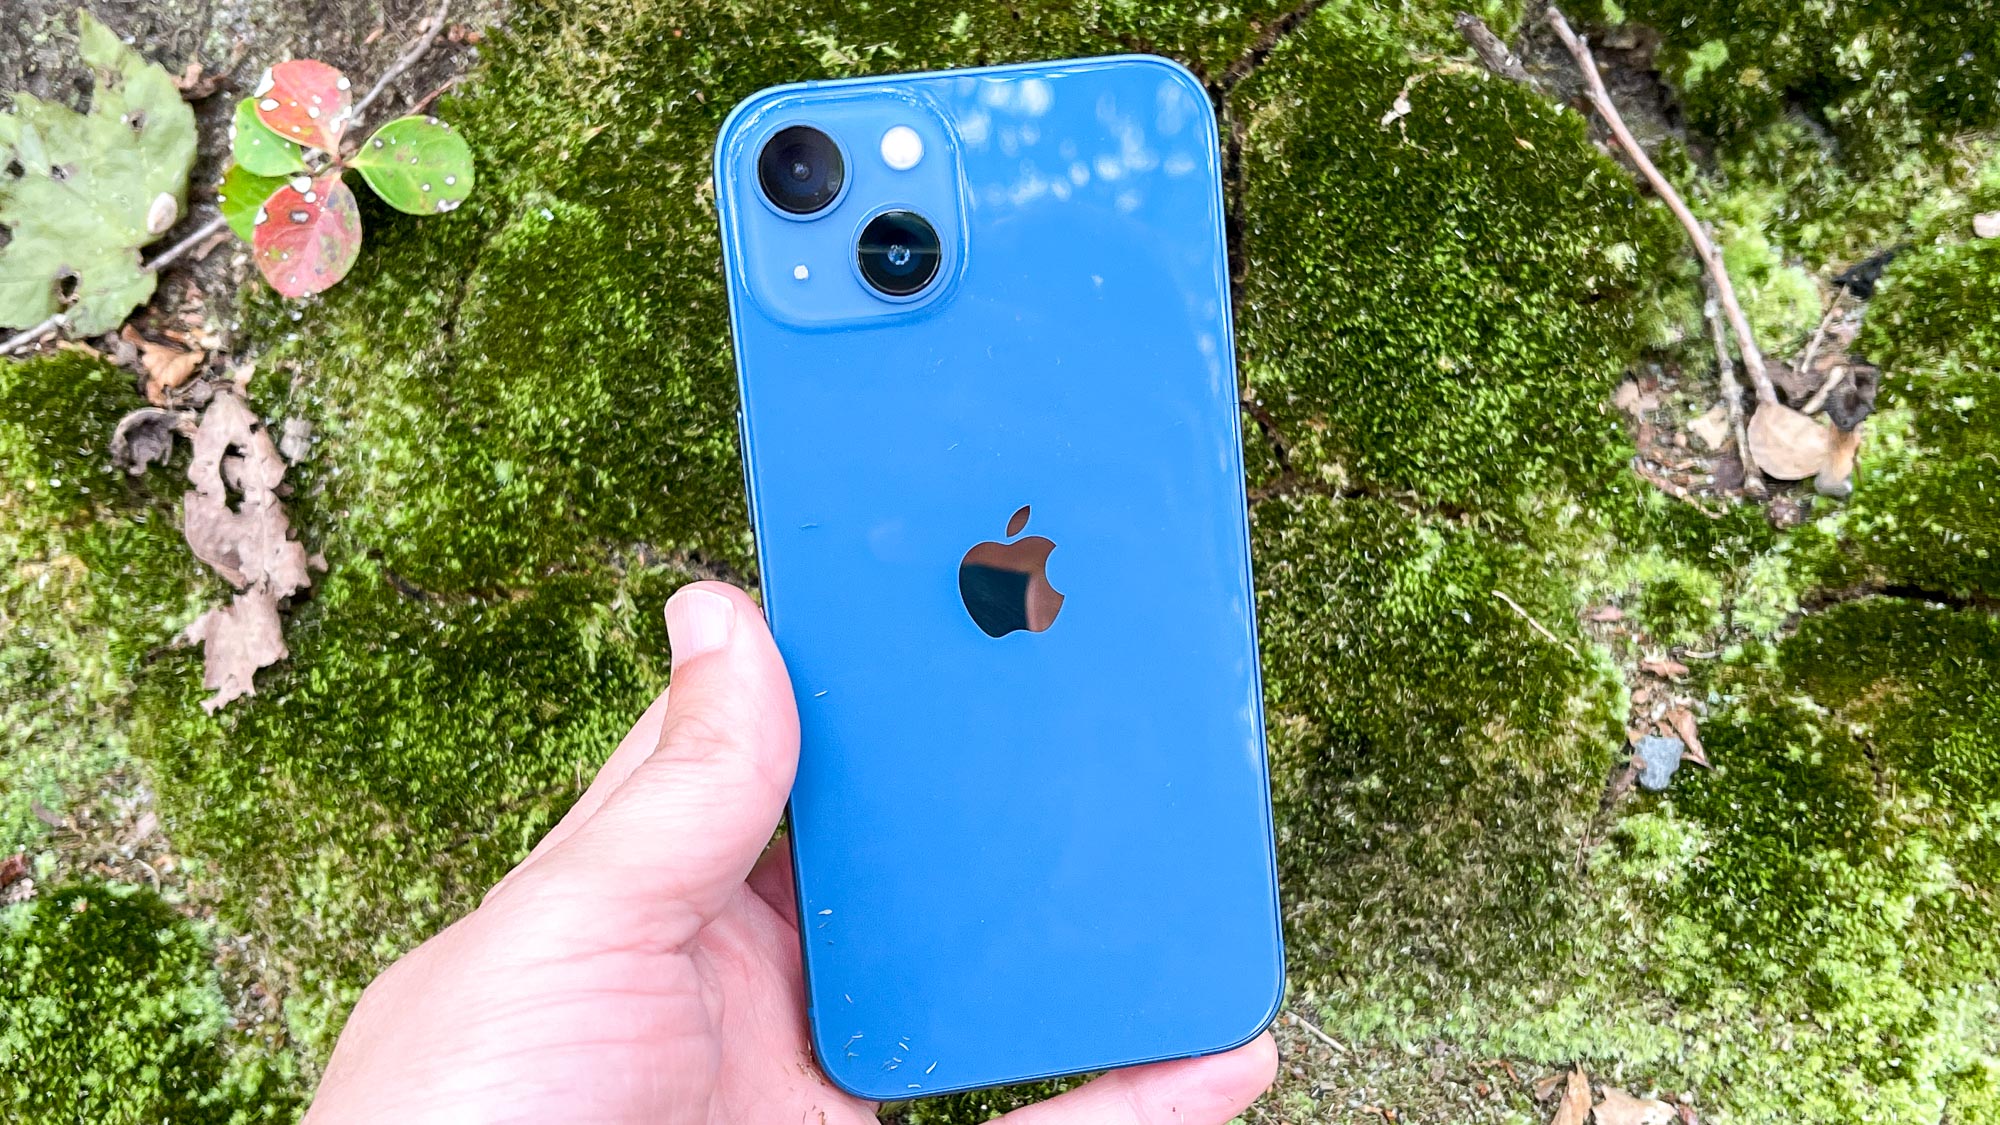 A blue iPhone 13 held in front of green foliage